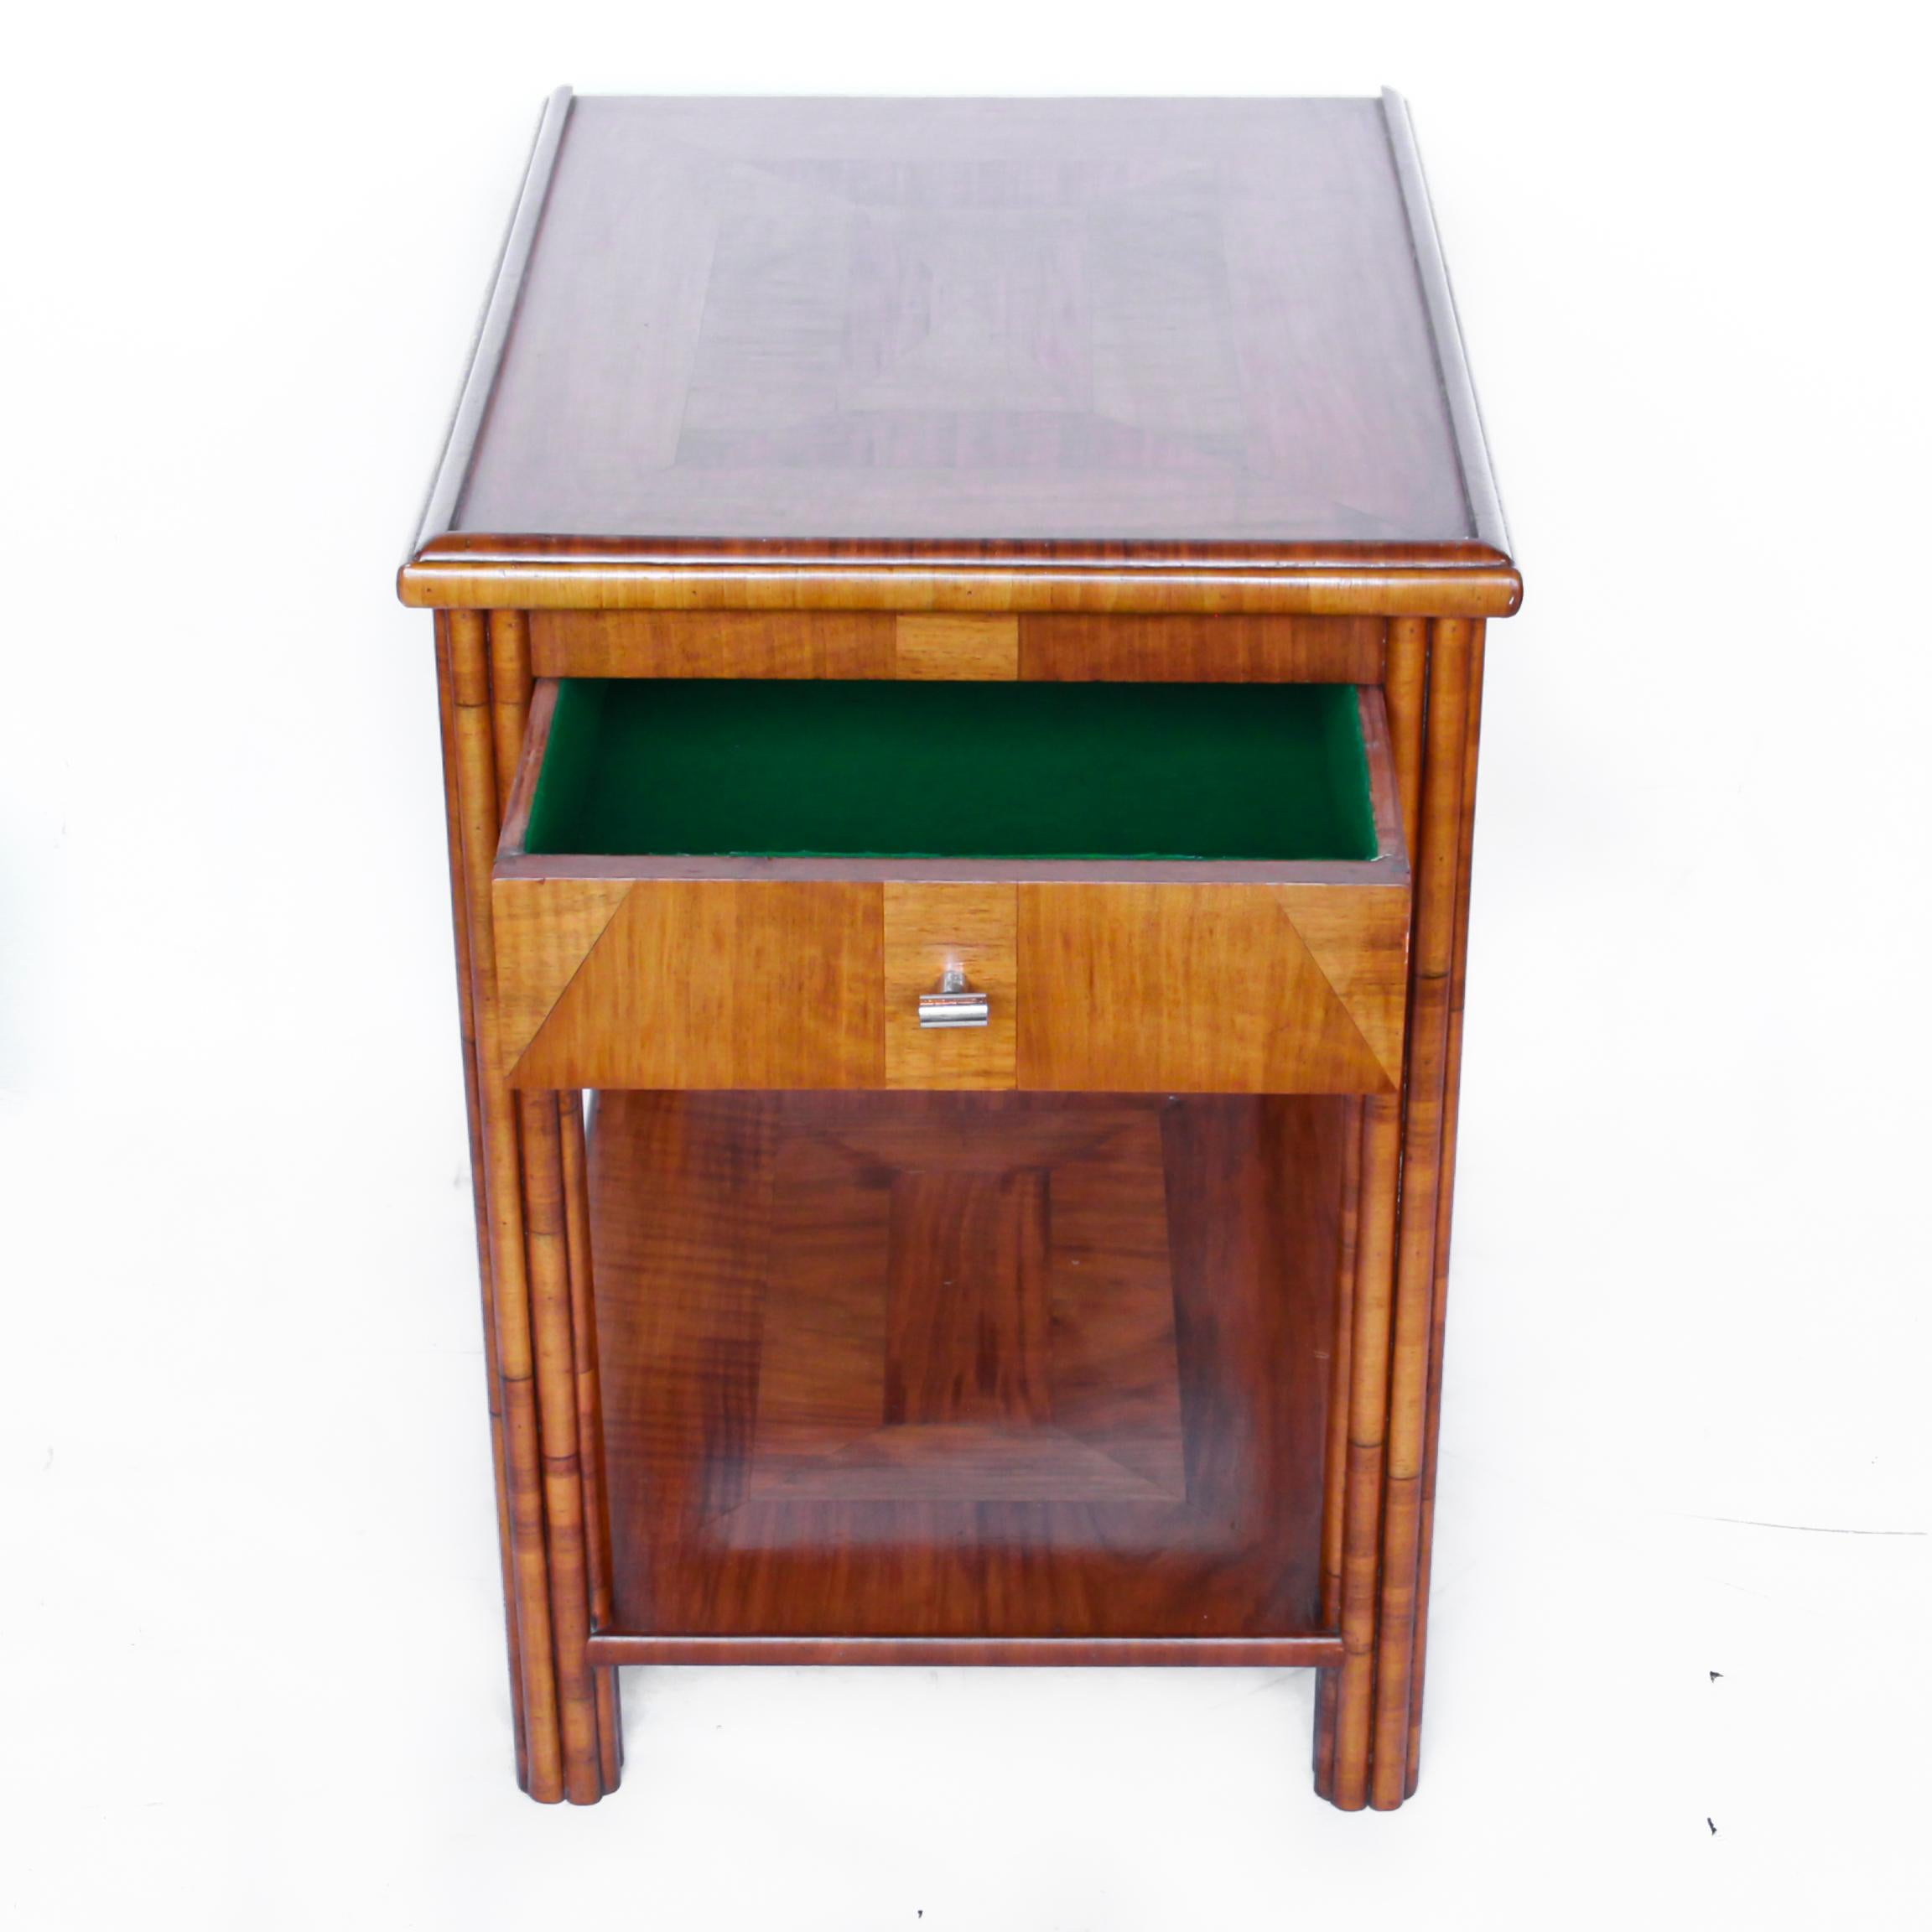 Mid-20th Century Art Deco Occasional Table Walnut with Sliding Tray and Integral Drawer 1930's